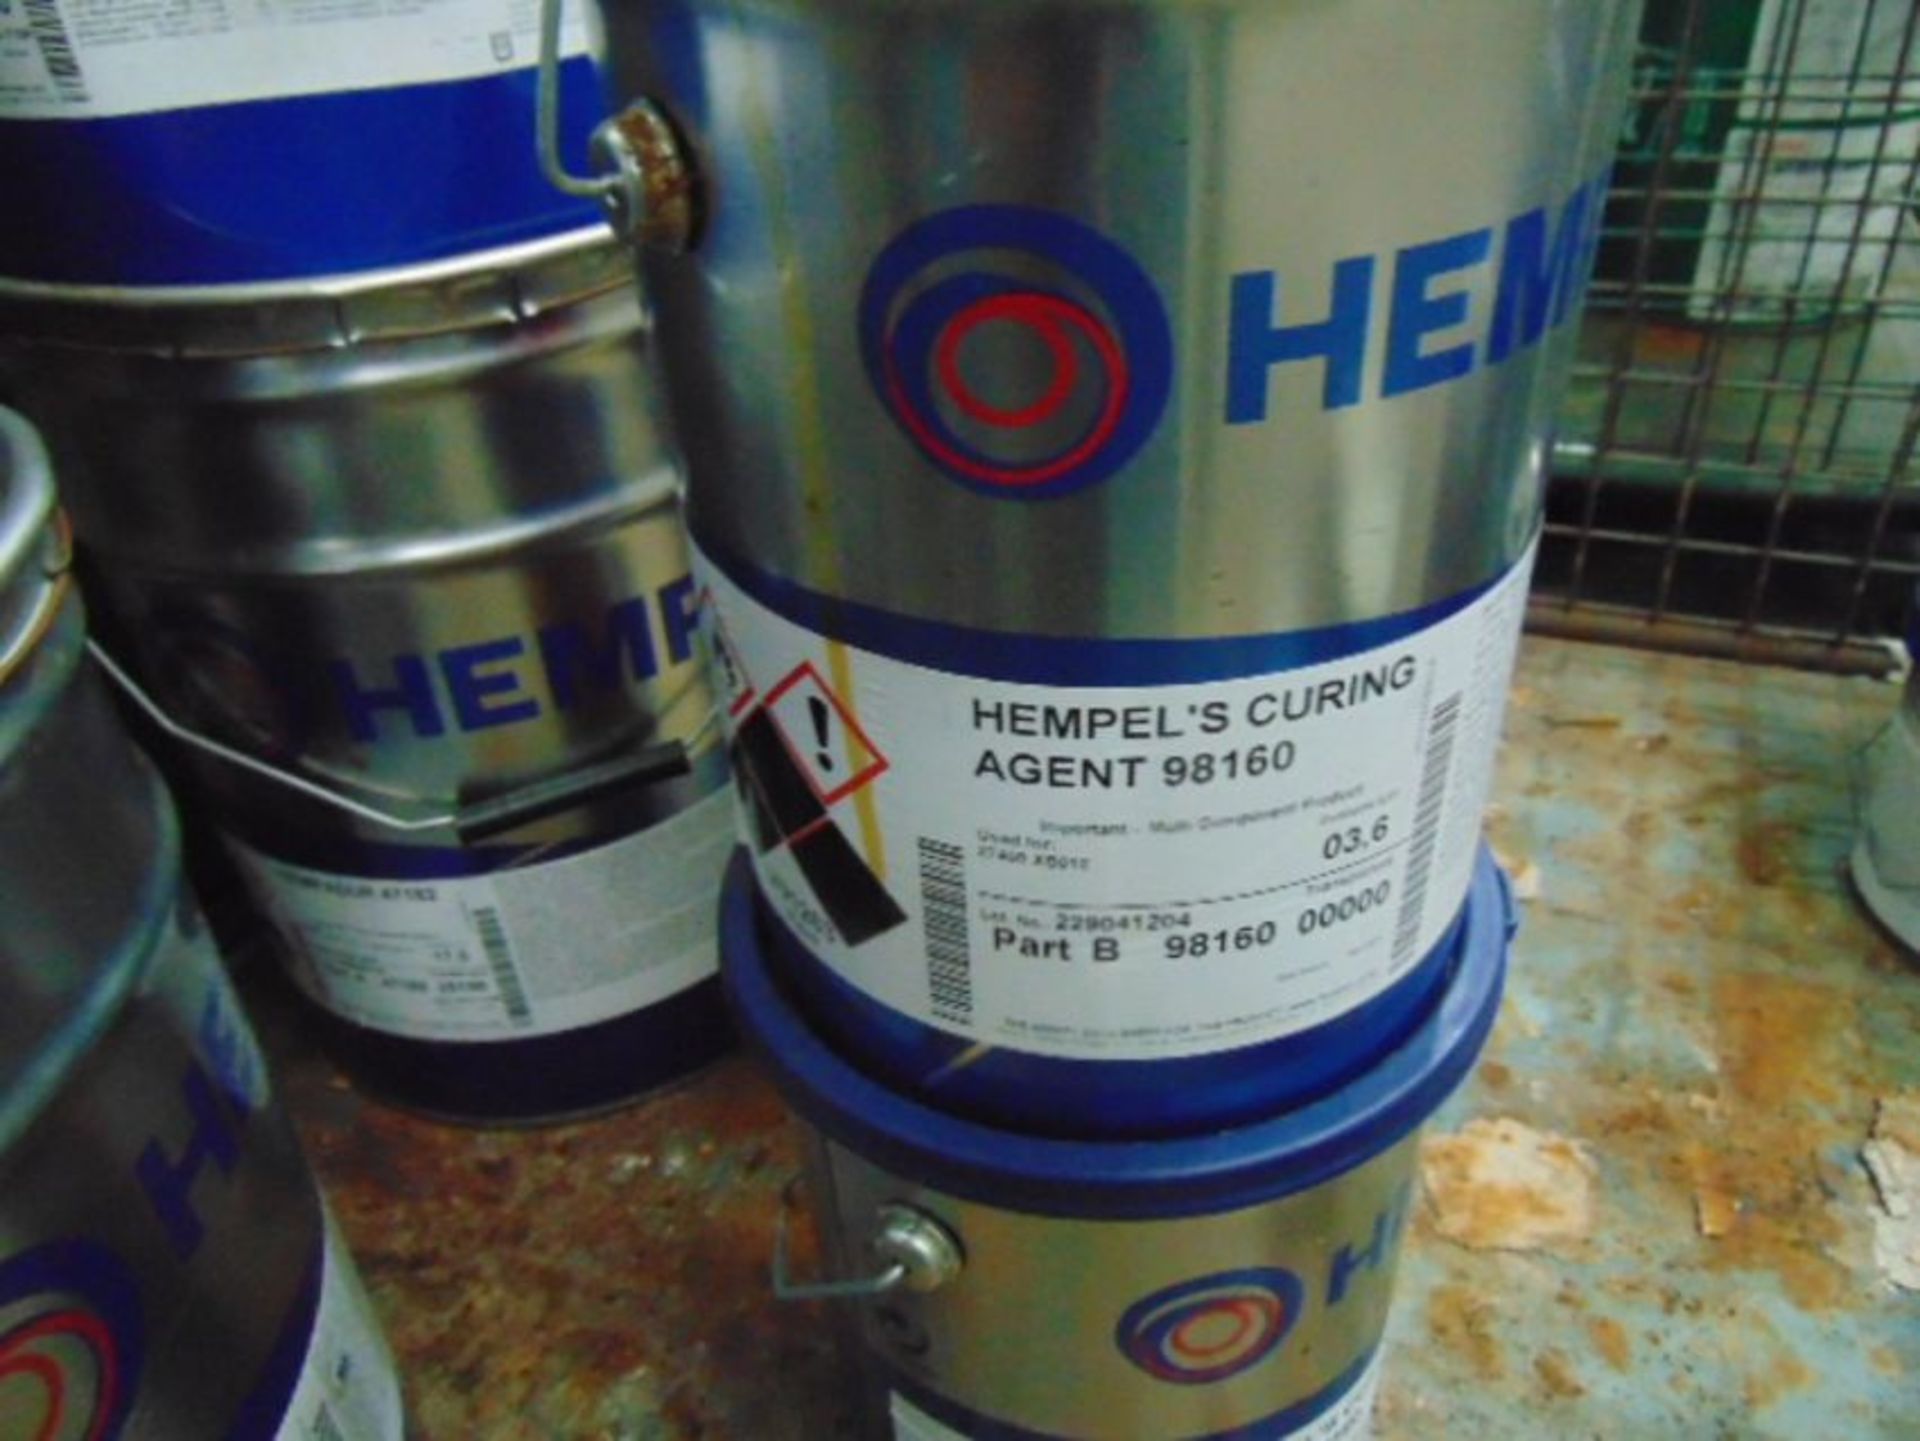 6x 17.5 litre Drums of Hempels 47182 Gray anti corrosive 2 pack Gray paint - Image 2 of 3